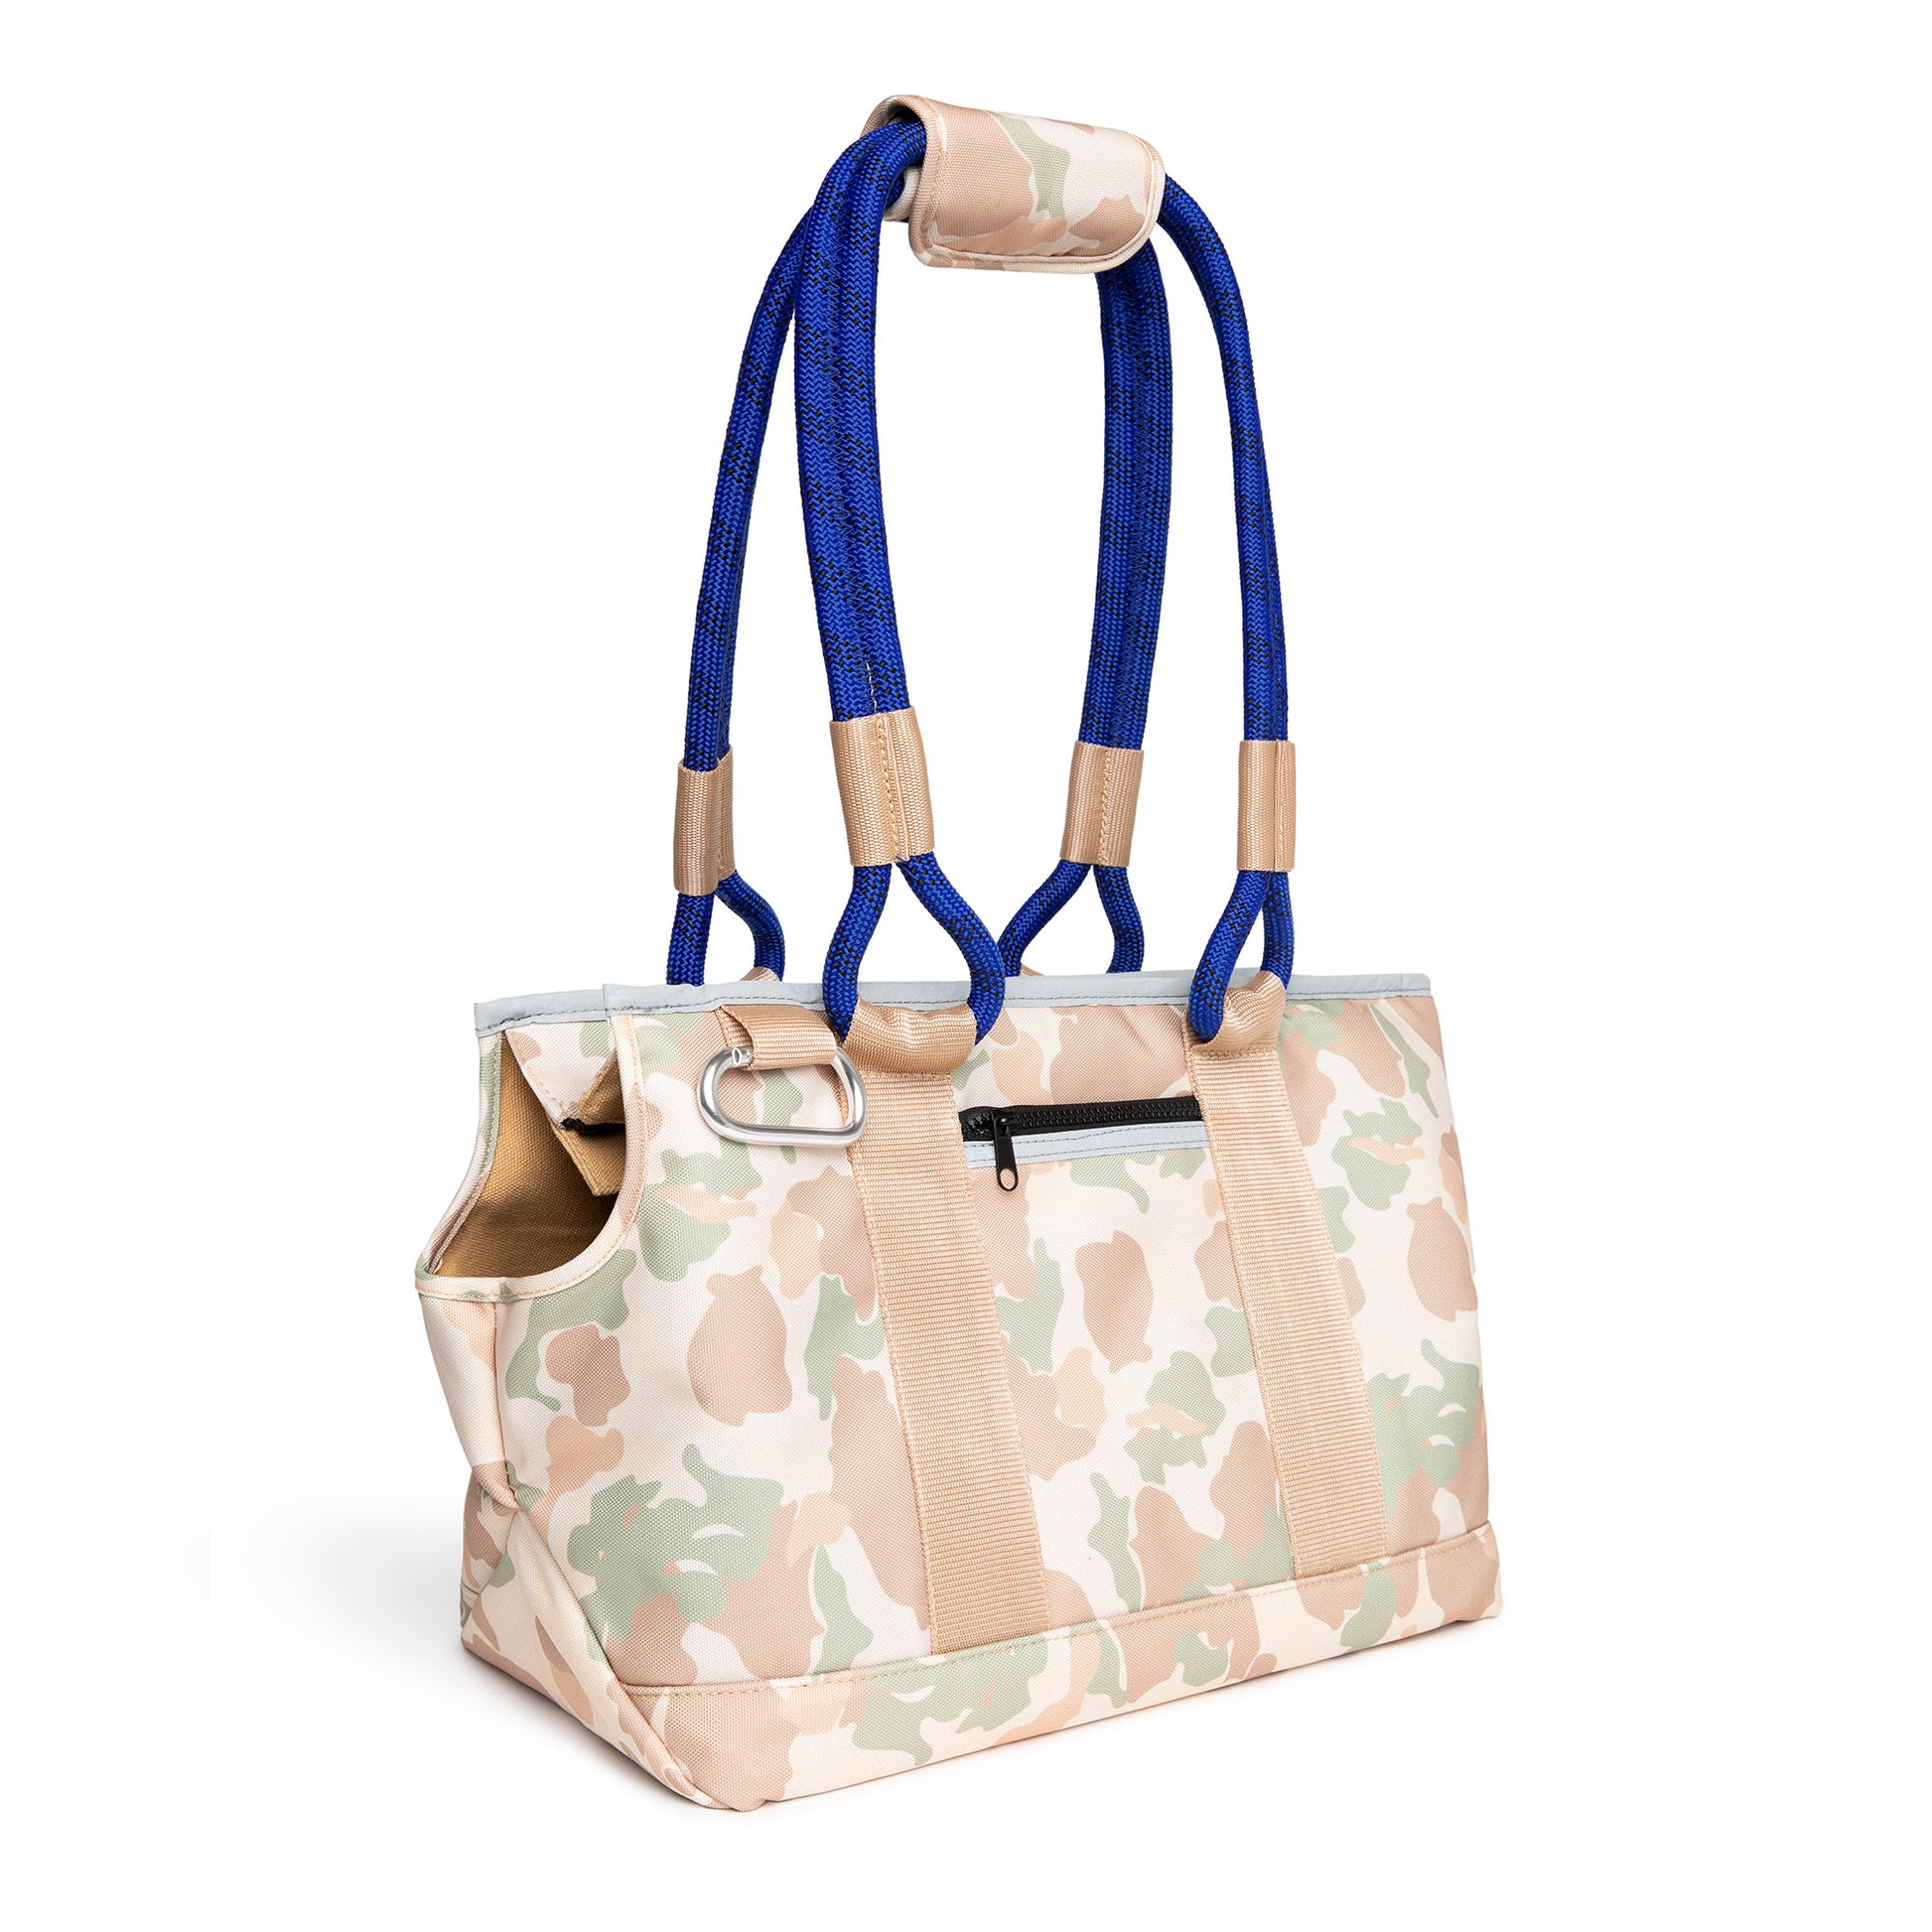 Out-Of-Office Dog Carrier in Camo with Orange Straps